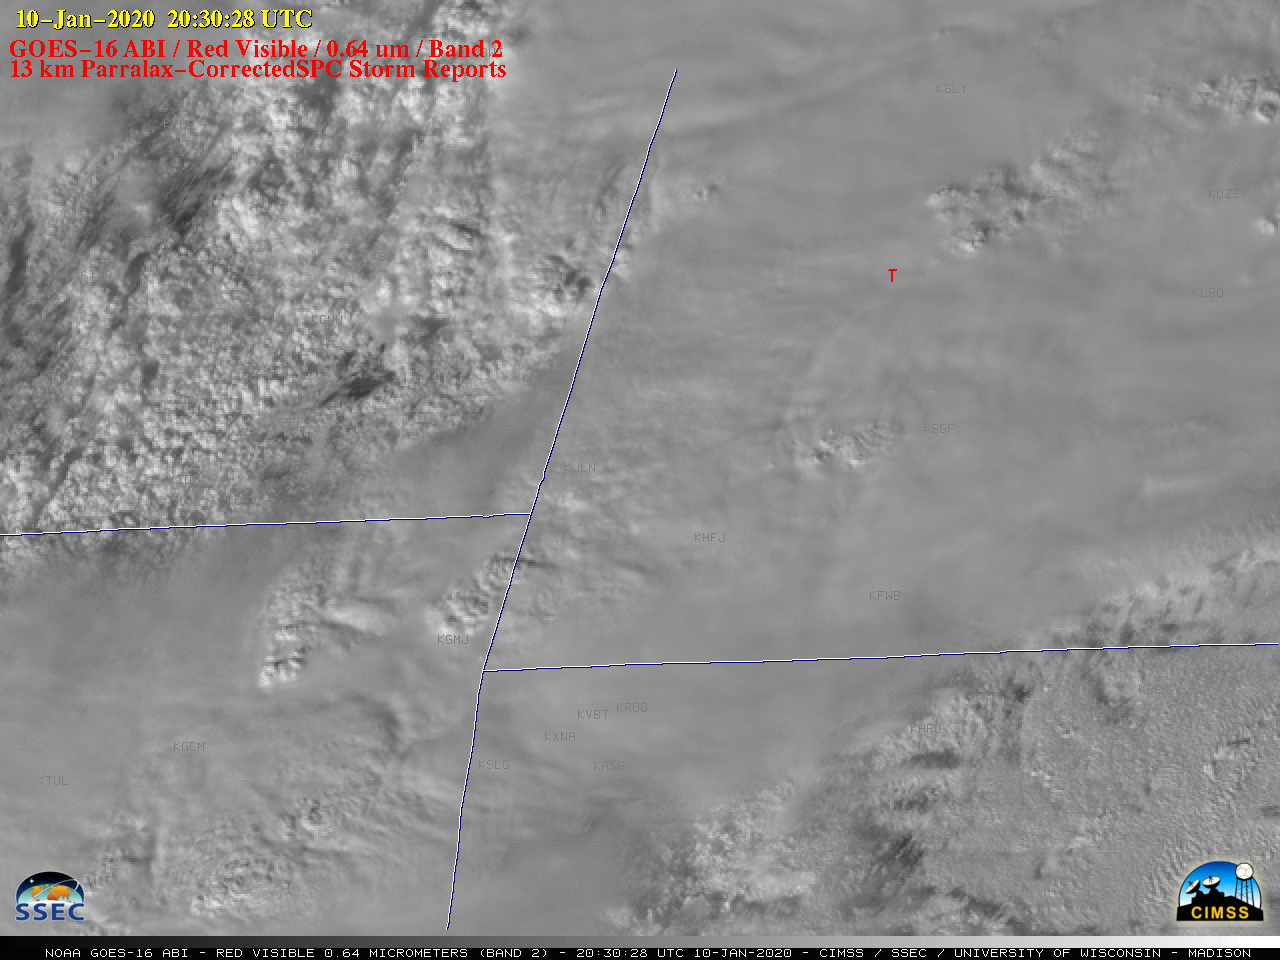 GOES-16 "Red" Visible (0.64 µm) image at 2030 UTC, including plot of SPC Storm Reports (with and without parallax correction) [click to enlarge]